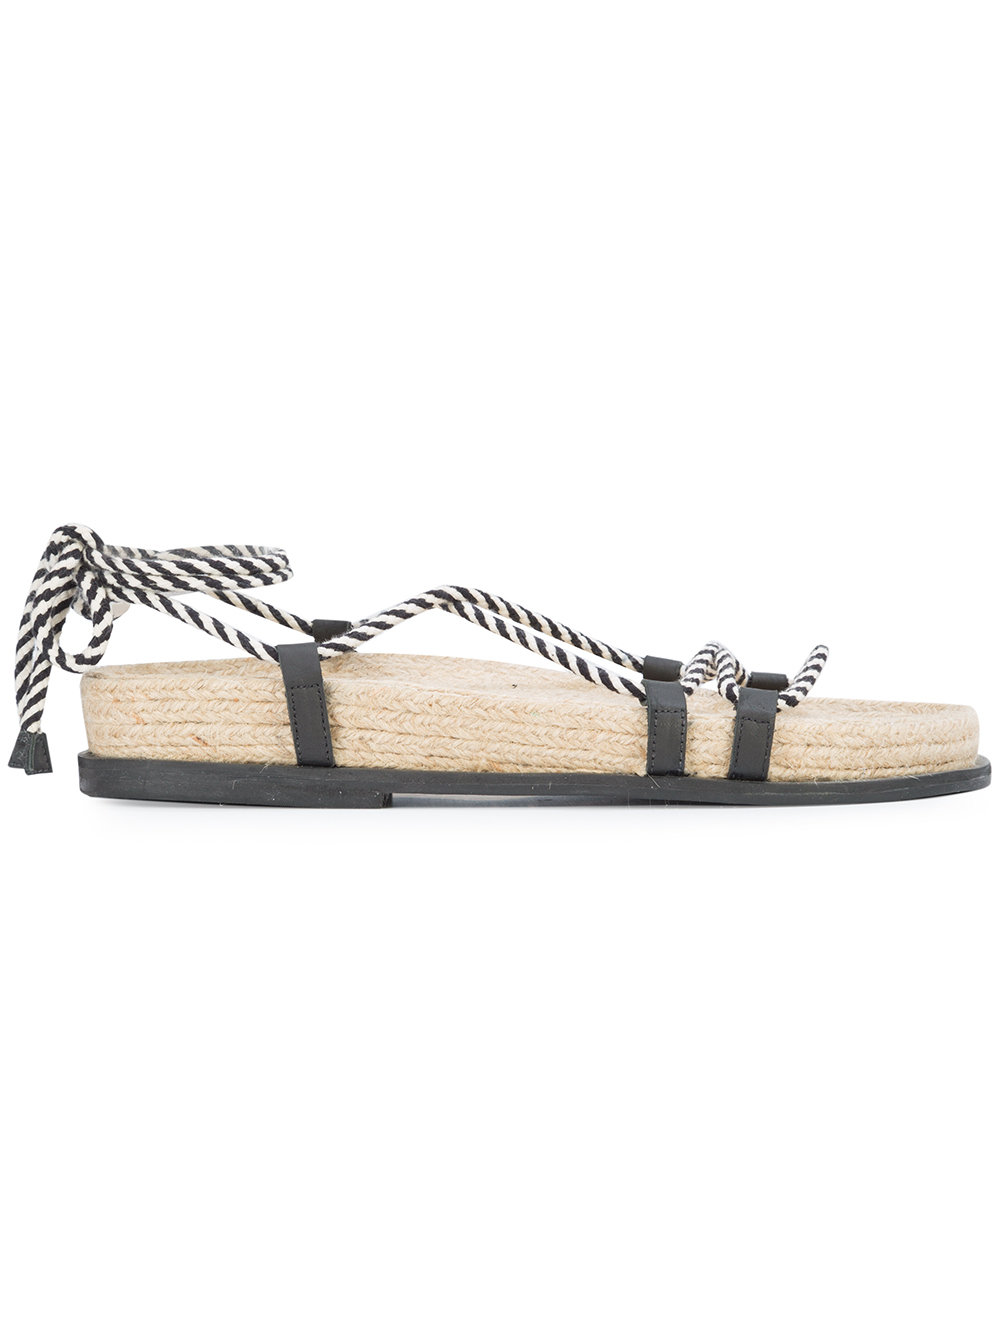 is this the new gladiator sandal?